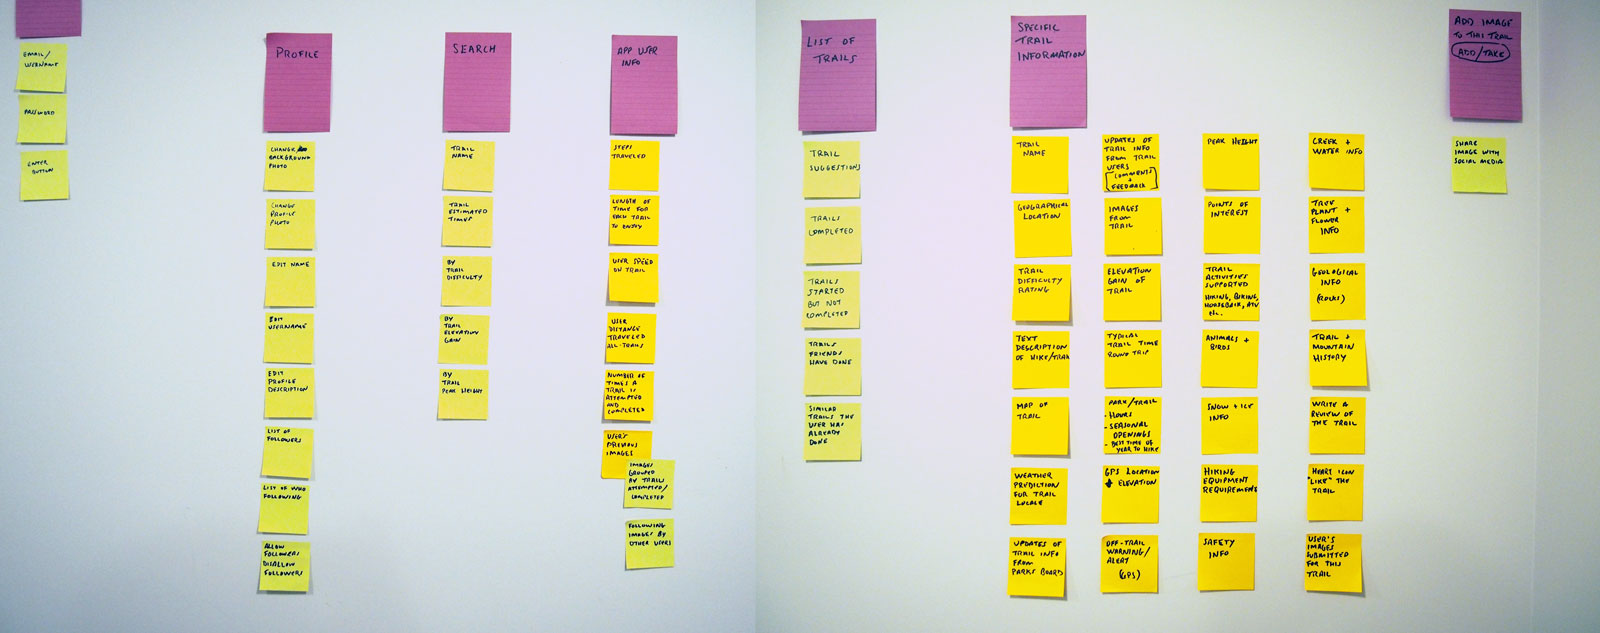 Ascent Tools App Information Architecture Post-it Notes